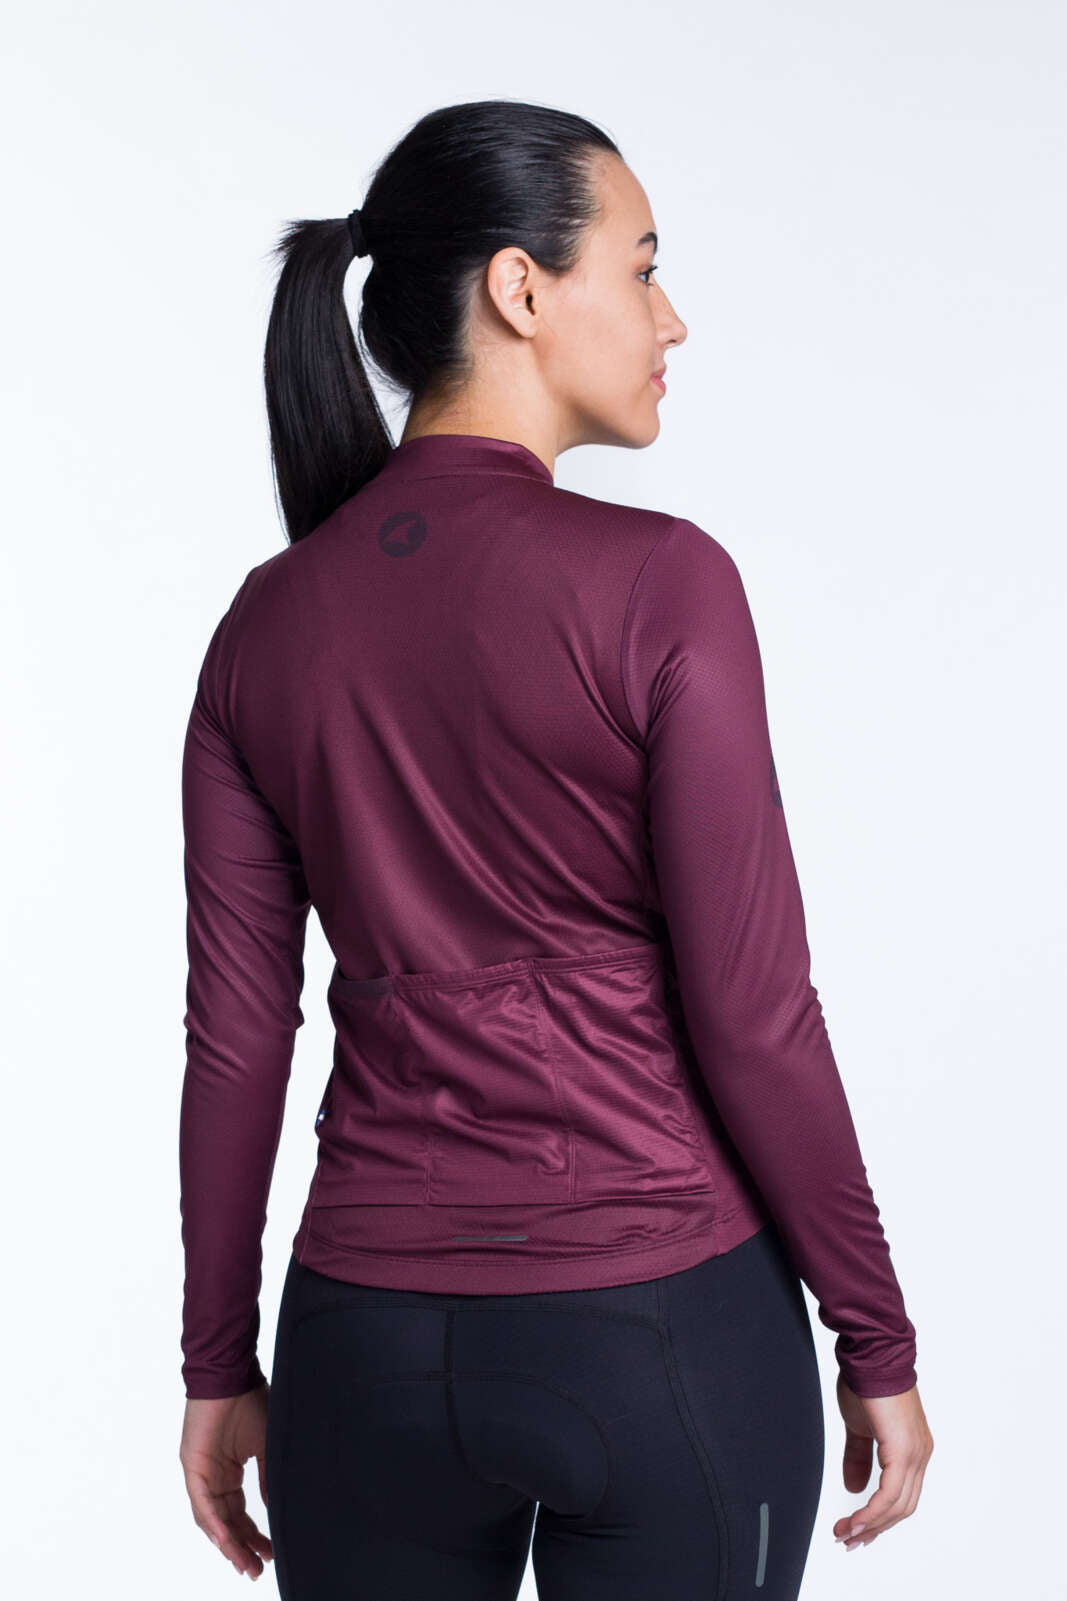 Women's Burgundy Long Sleeve Cycling Jersey - Ascent Back View